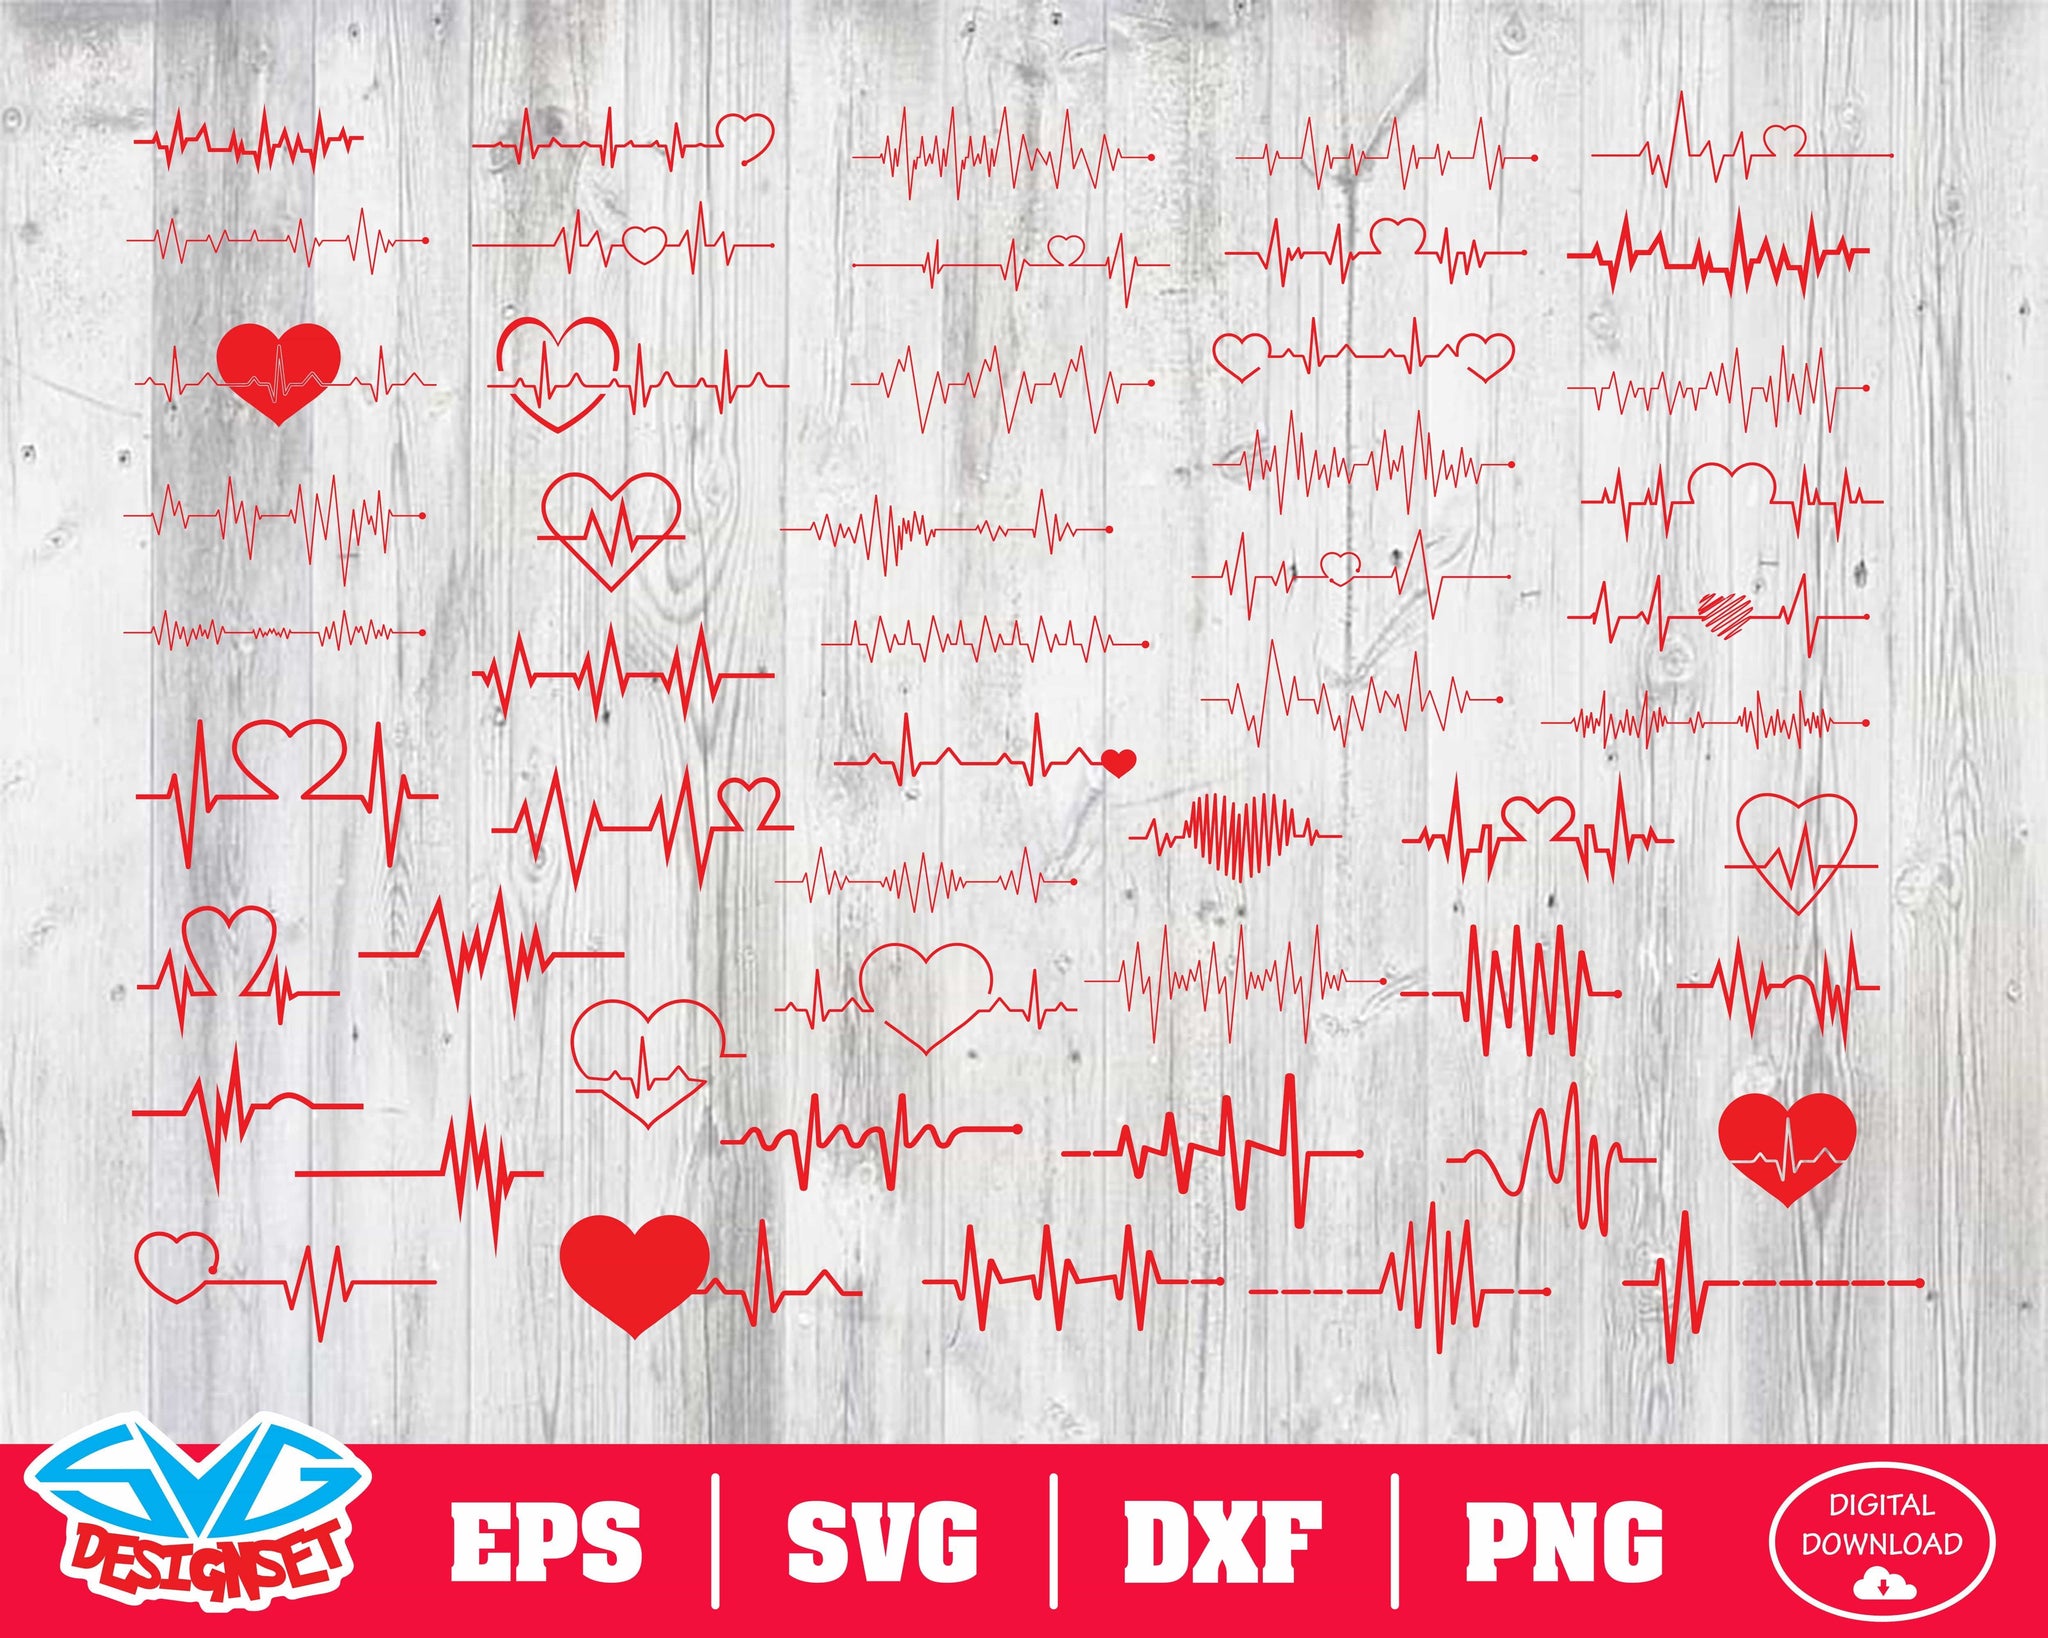 Heartbeat Svg, Dxf, Eps, Png, Clipart, Silhouette and Cutfiles #2 - SVGDesignSets